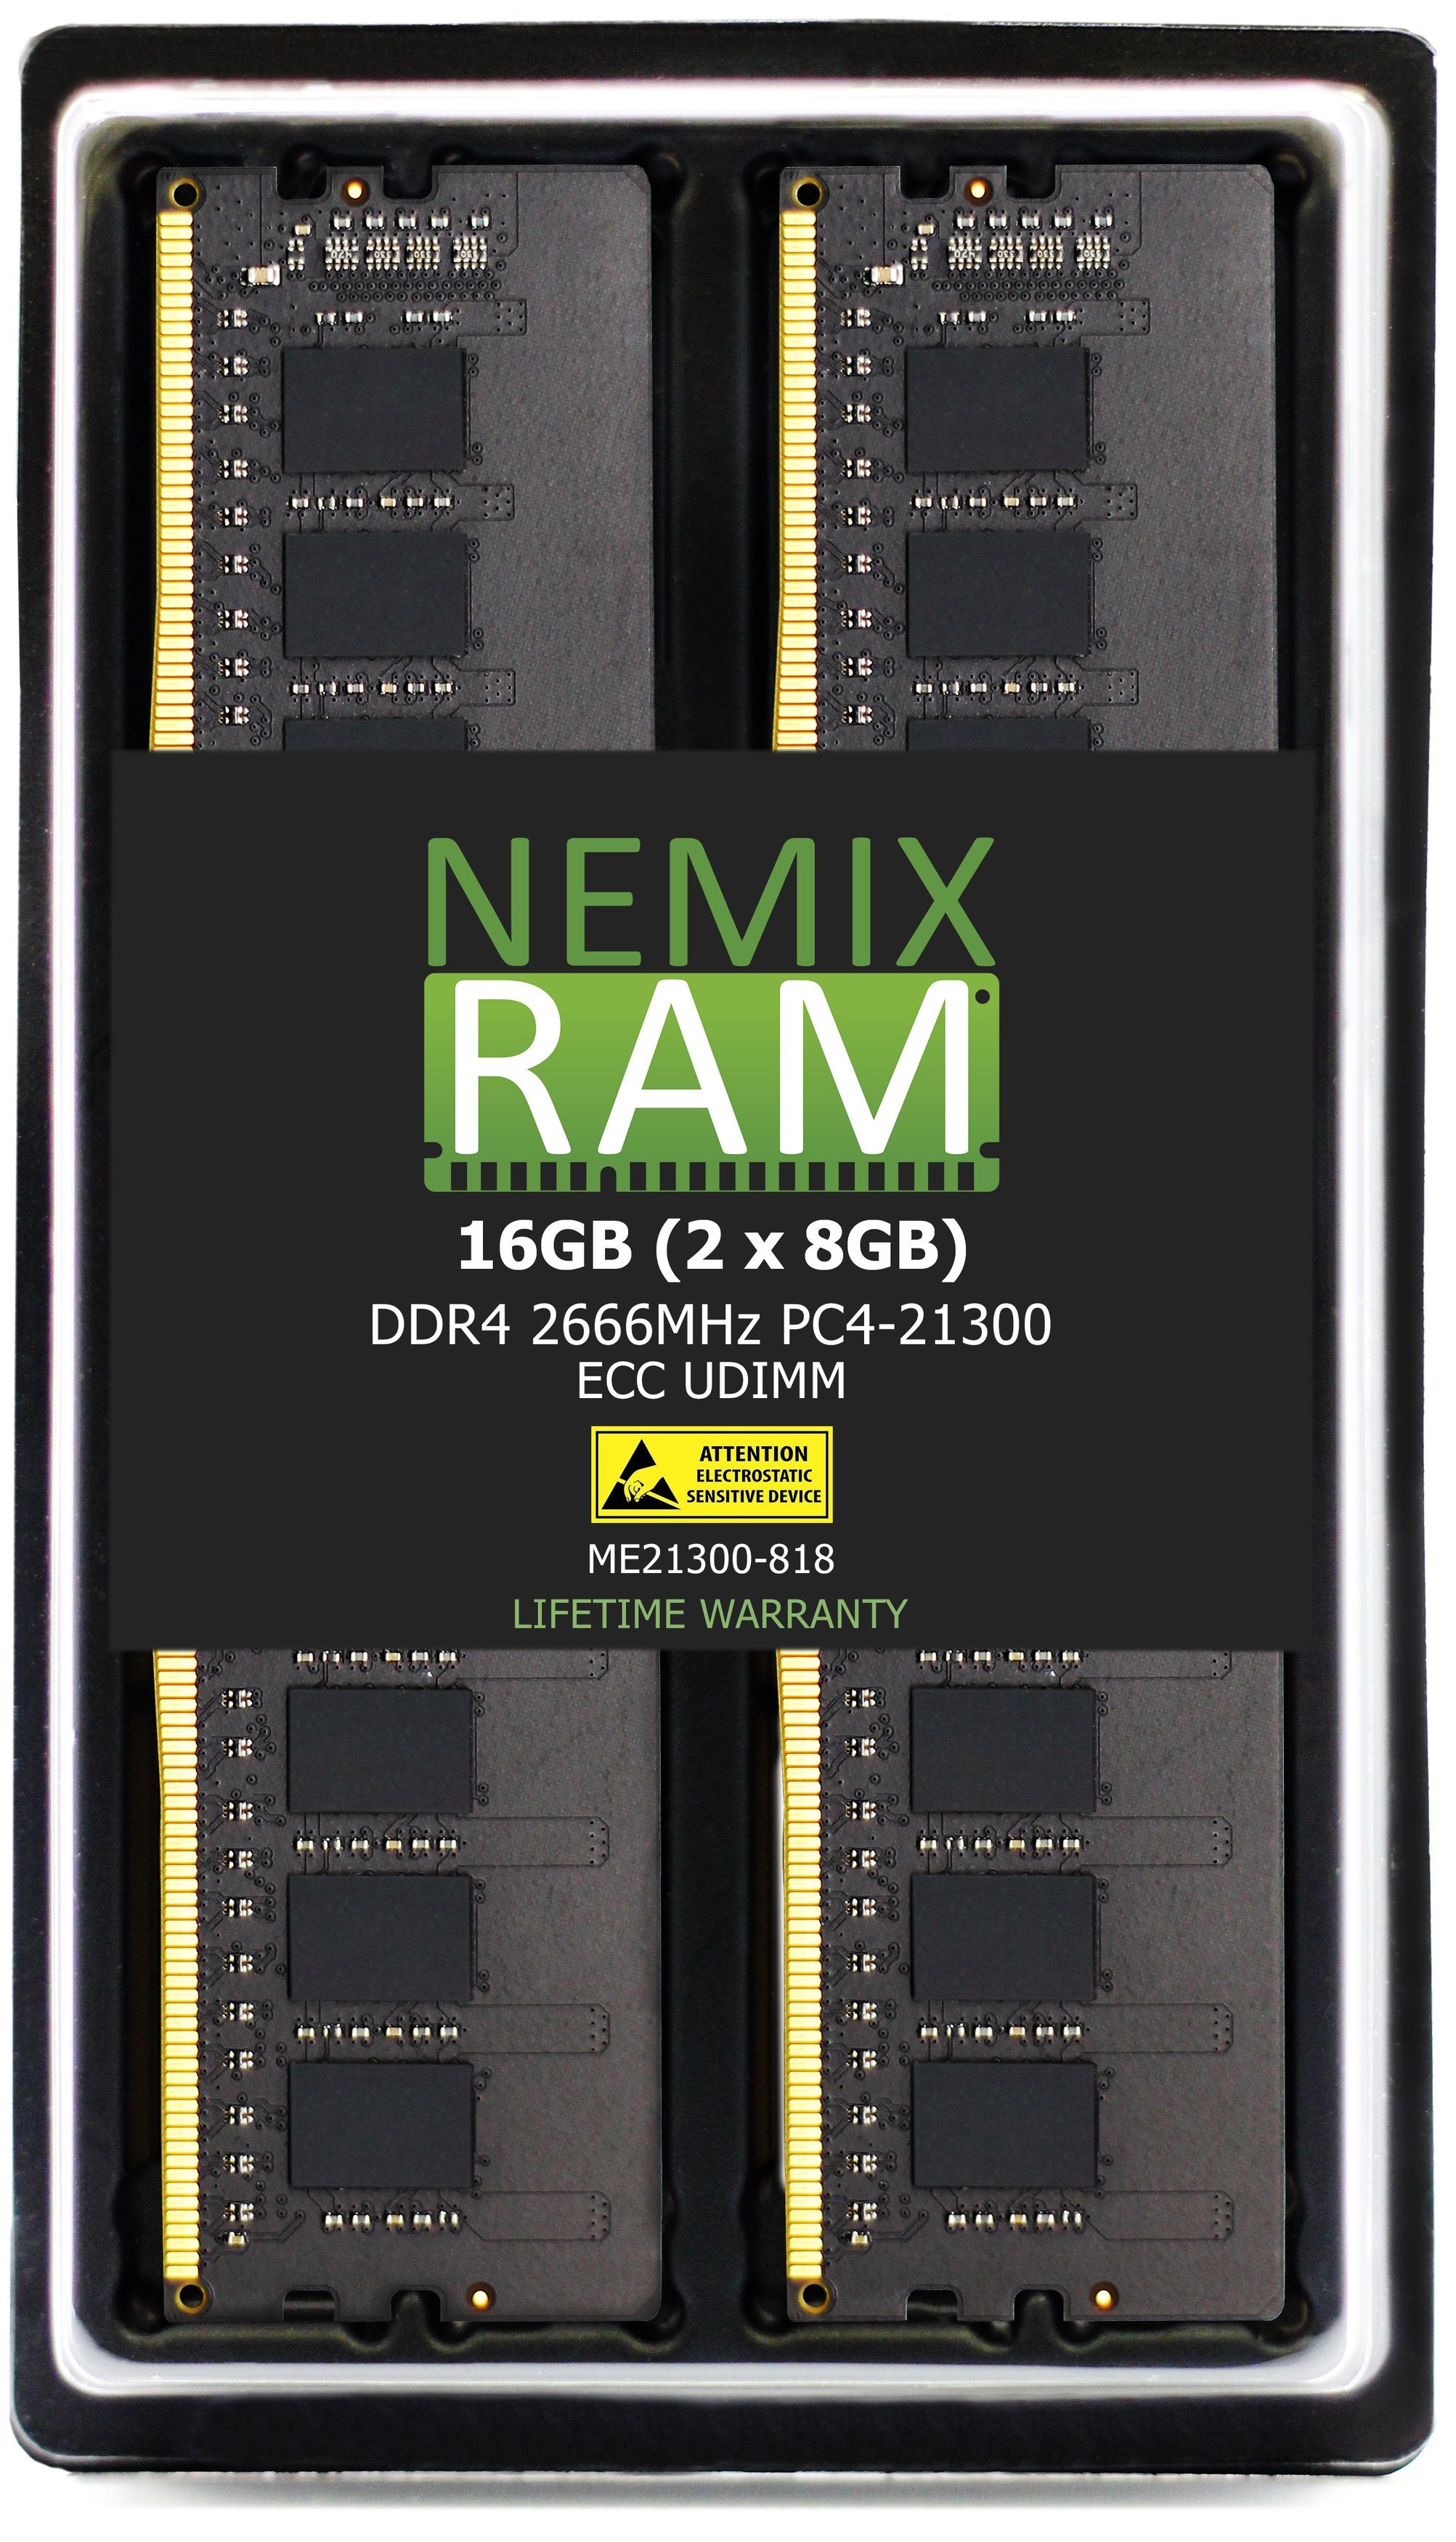 DDR4 2666MHZ PC4-21300 ECC UDIMM Compatible with Synology RackStation RS2423+